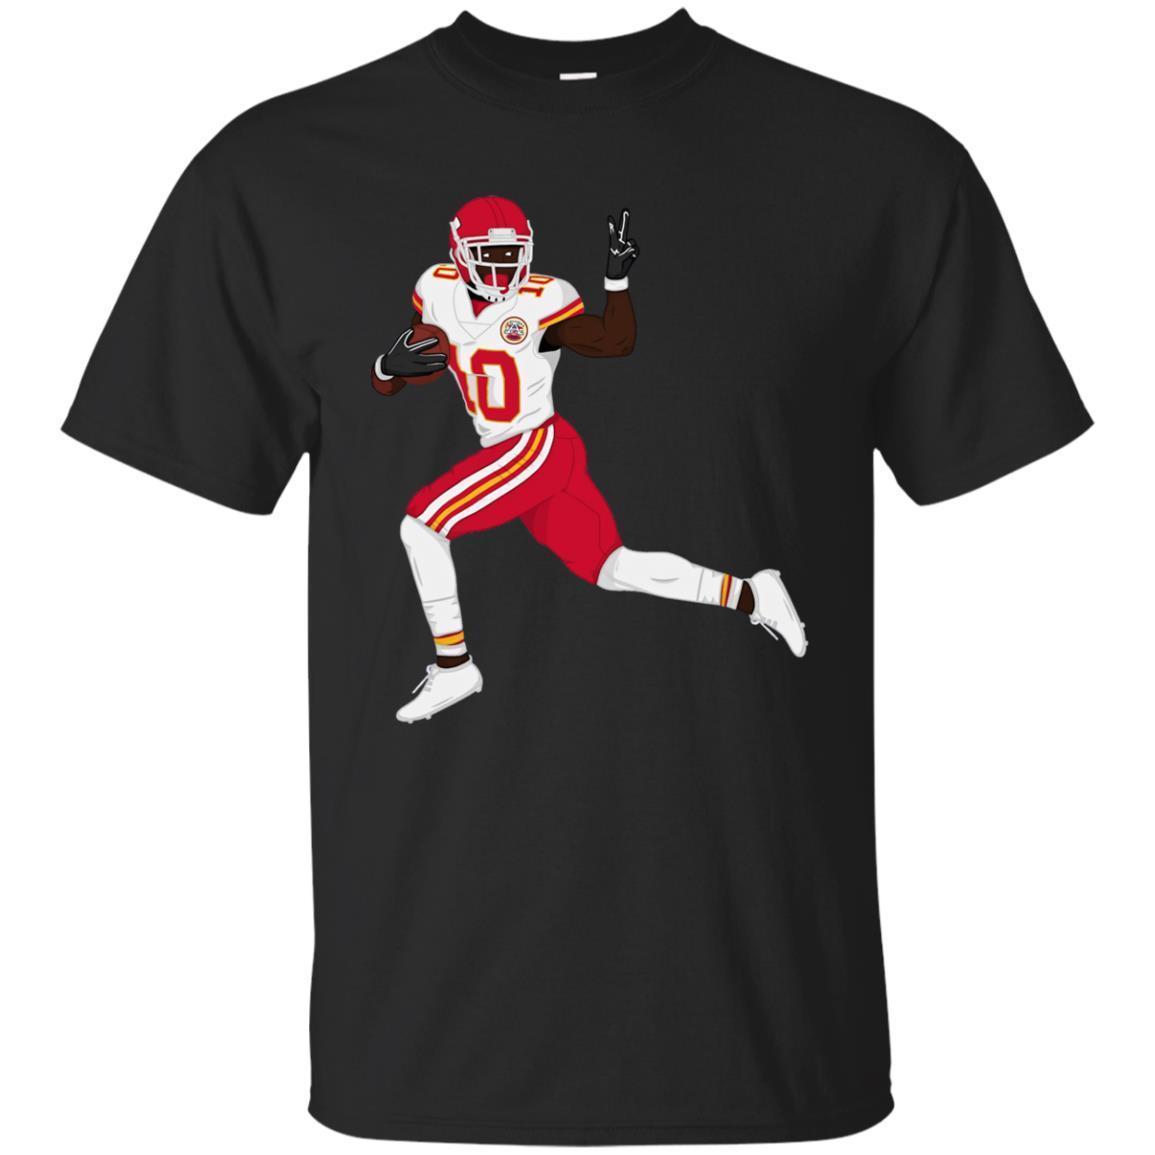 Check Out This Awesome Peace Love Football Tyreek Hill Kansas City Chiefs Shirt